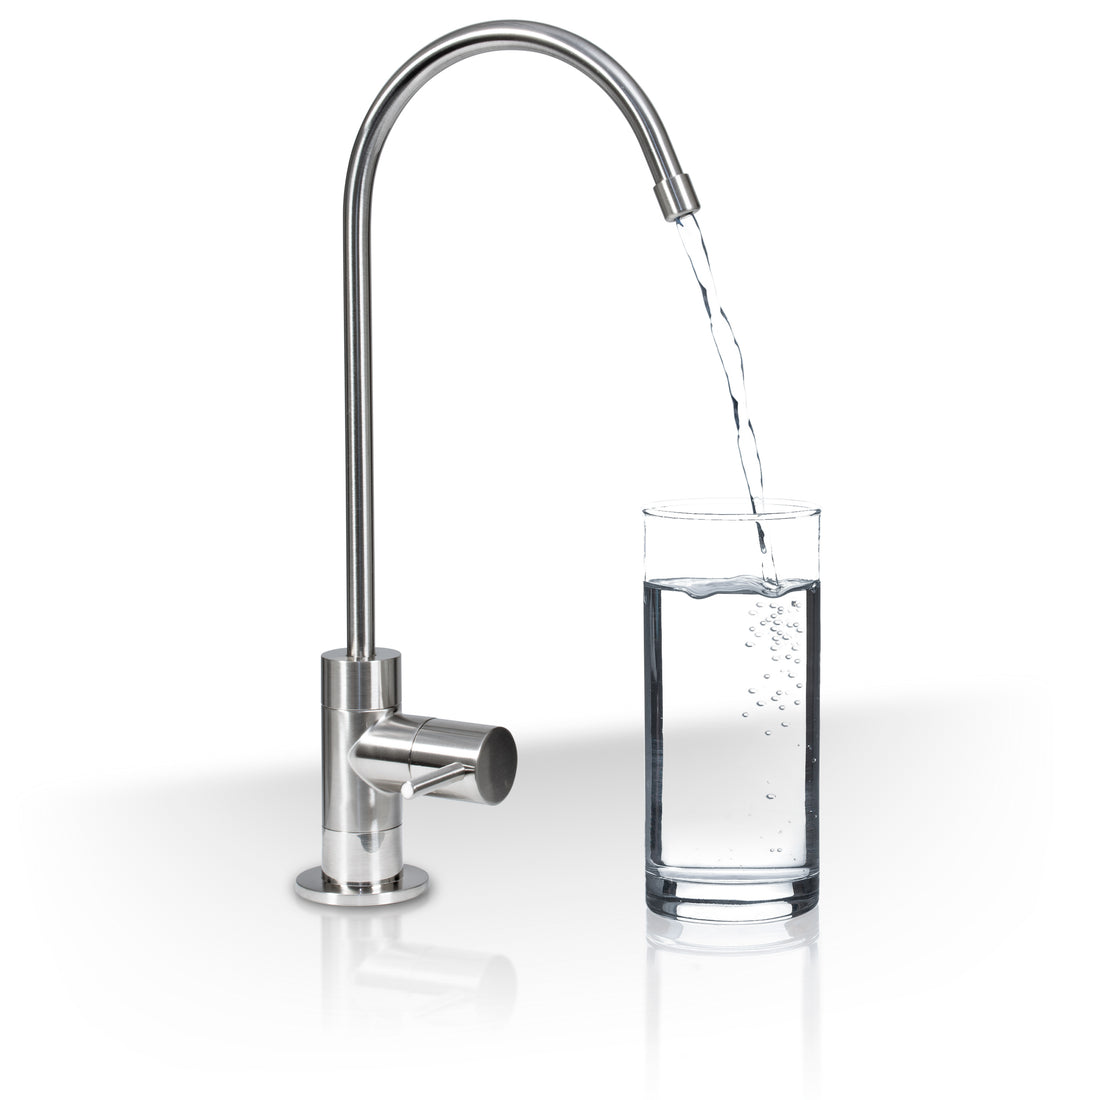 Aquasure Designer Series Contemporary Styled Drinking Water Designer Faucet with Ceramic Disc Valve (Brushed Nickel)